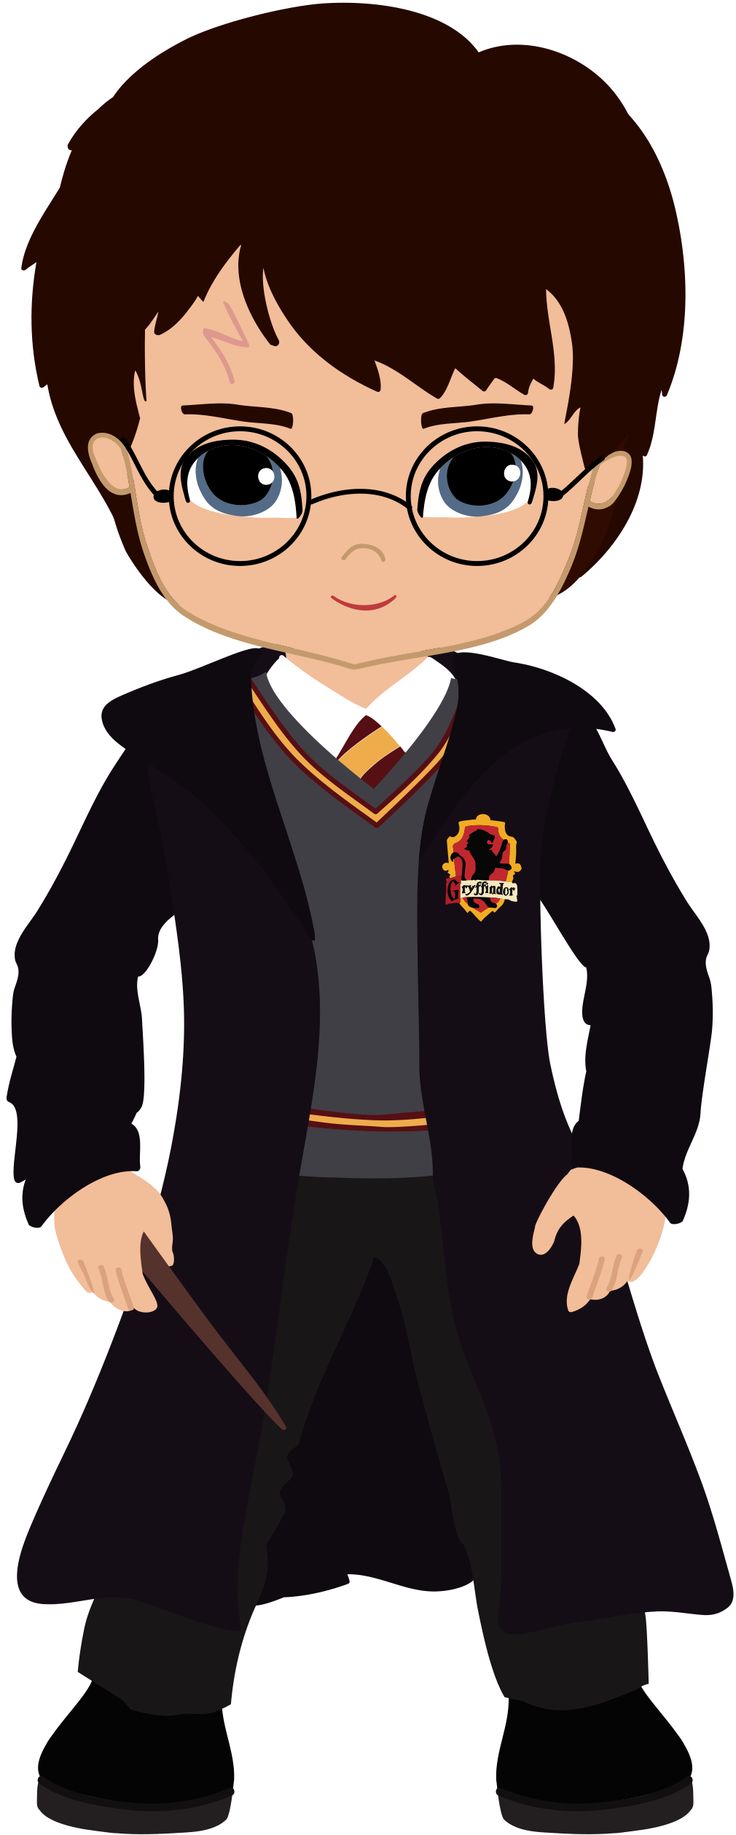 Harry Potter clipart #18, Download drawings